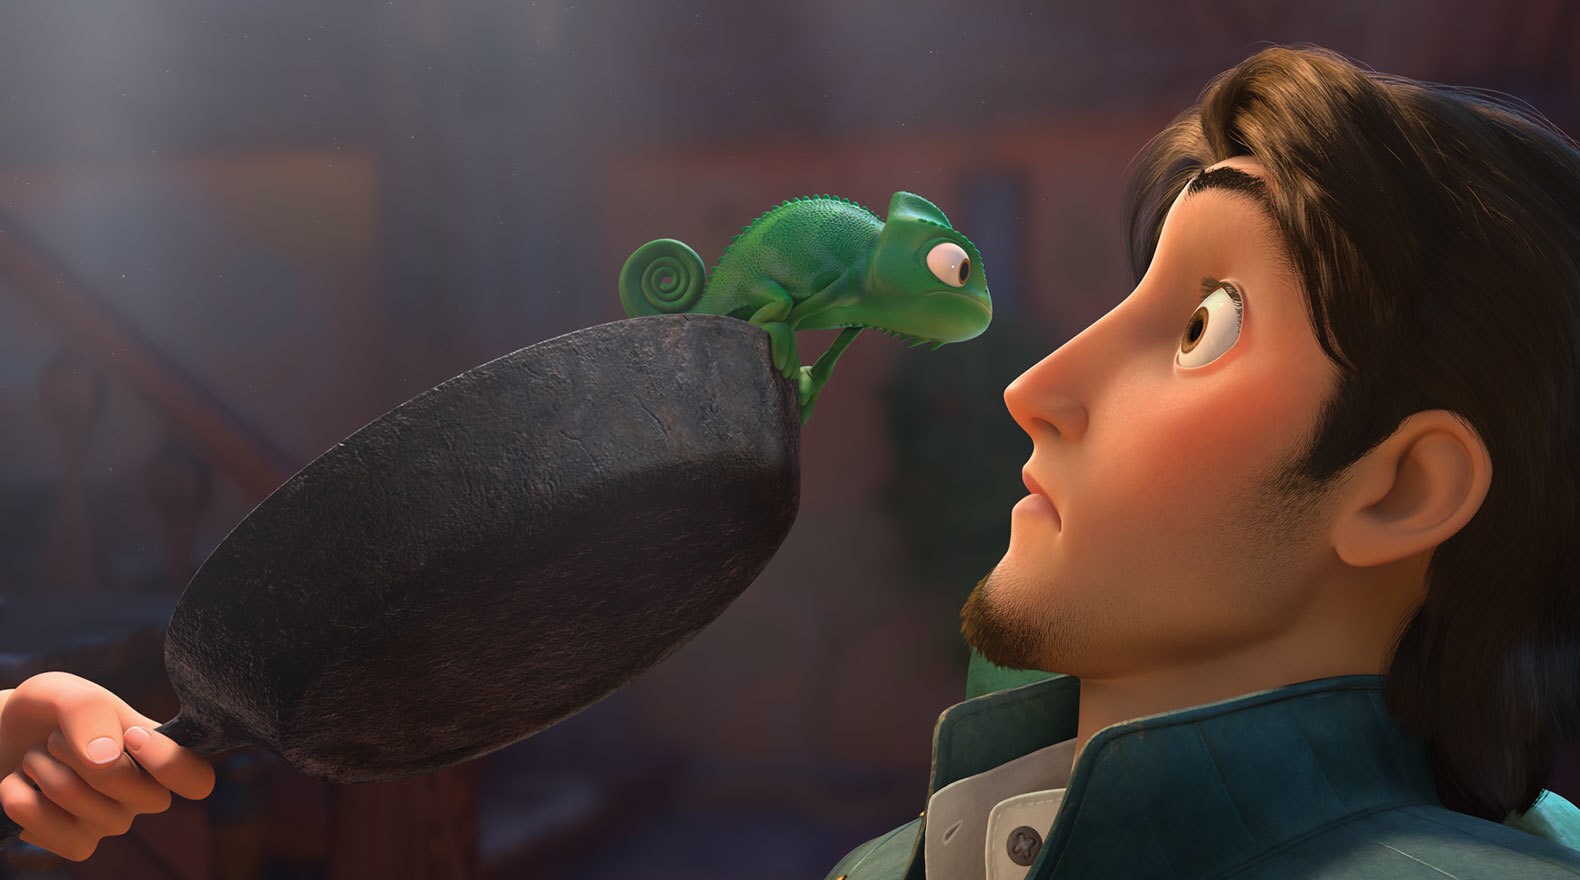 Pascal a chameleon staring at Flynn Rider voiced by Zachary Levi in Tangled